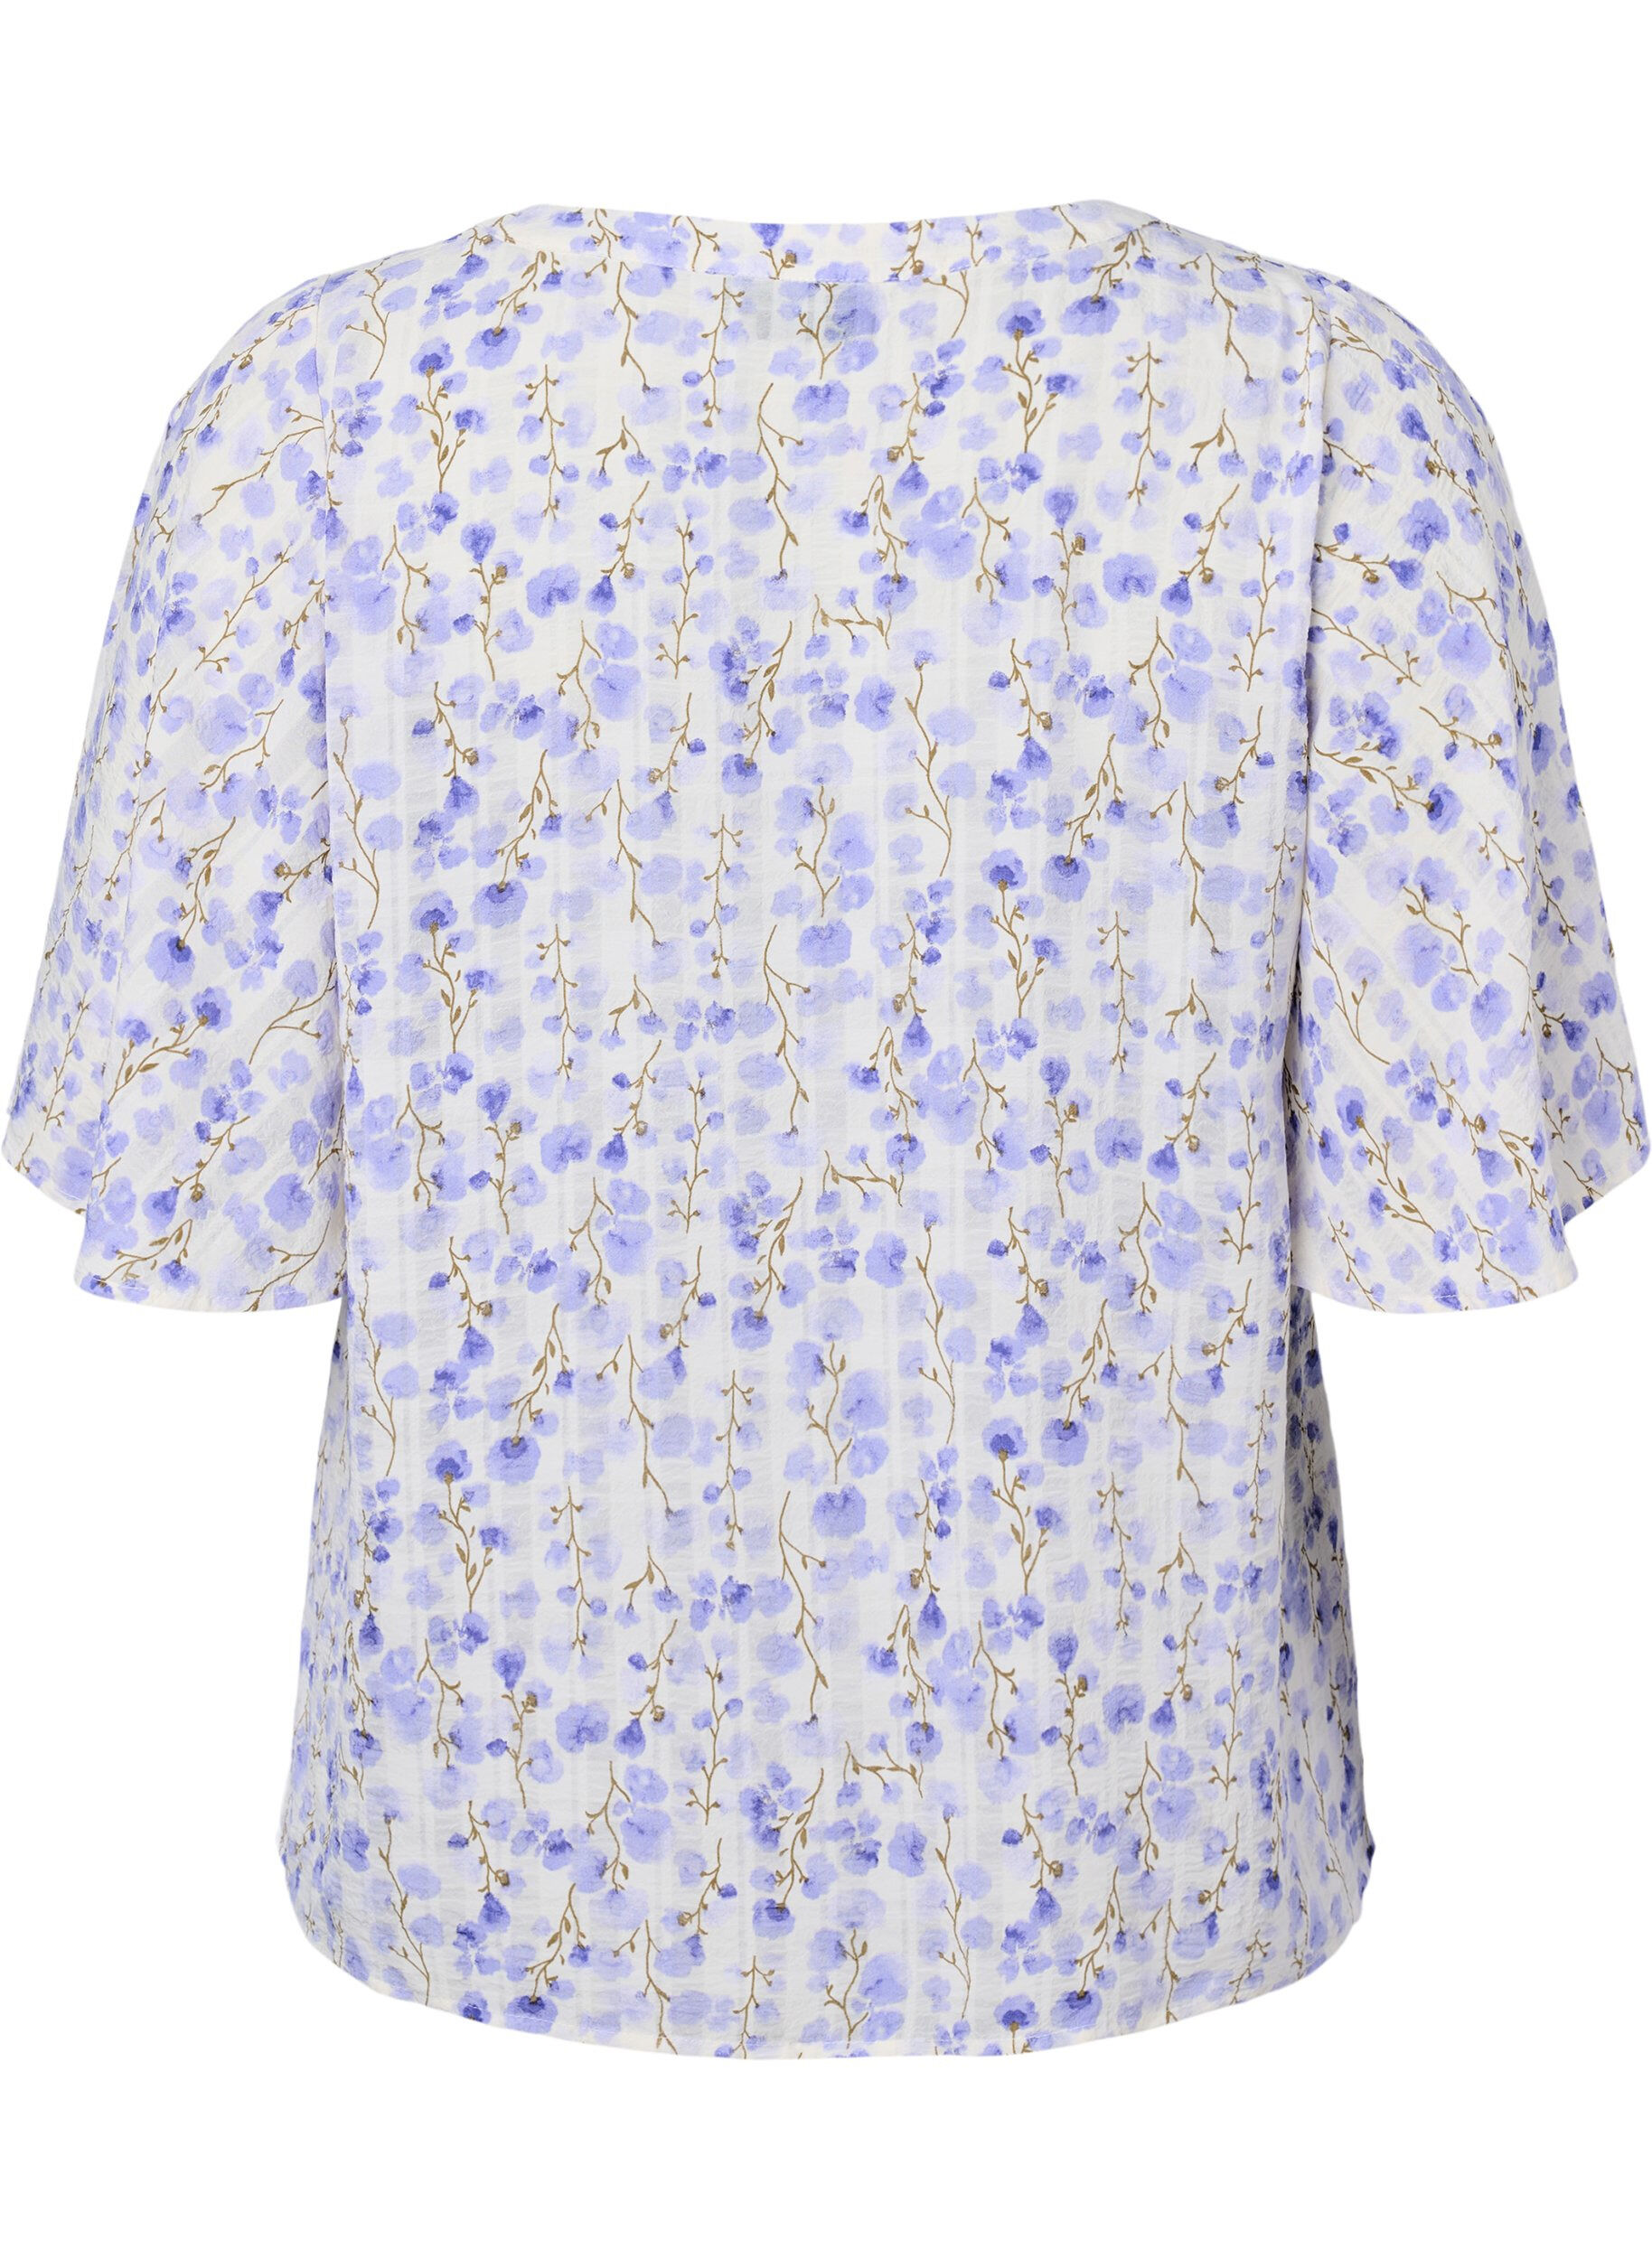 V-neck short sleeve blouse with floral print - White - Sz. 42-64 